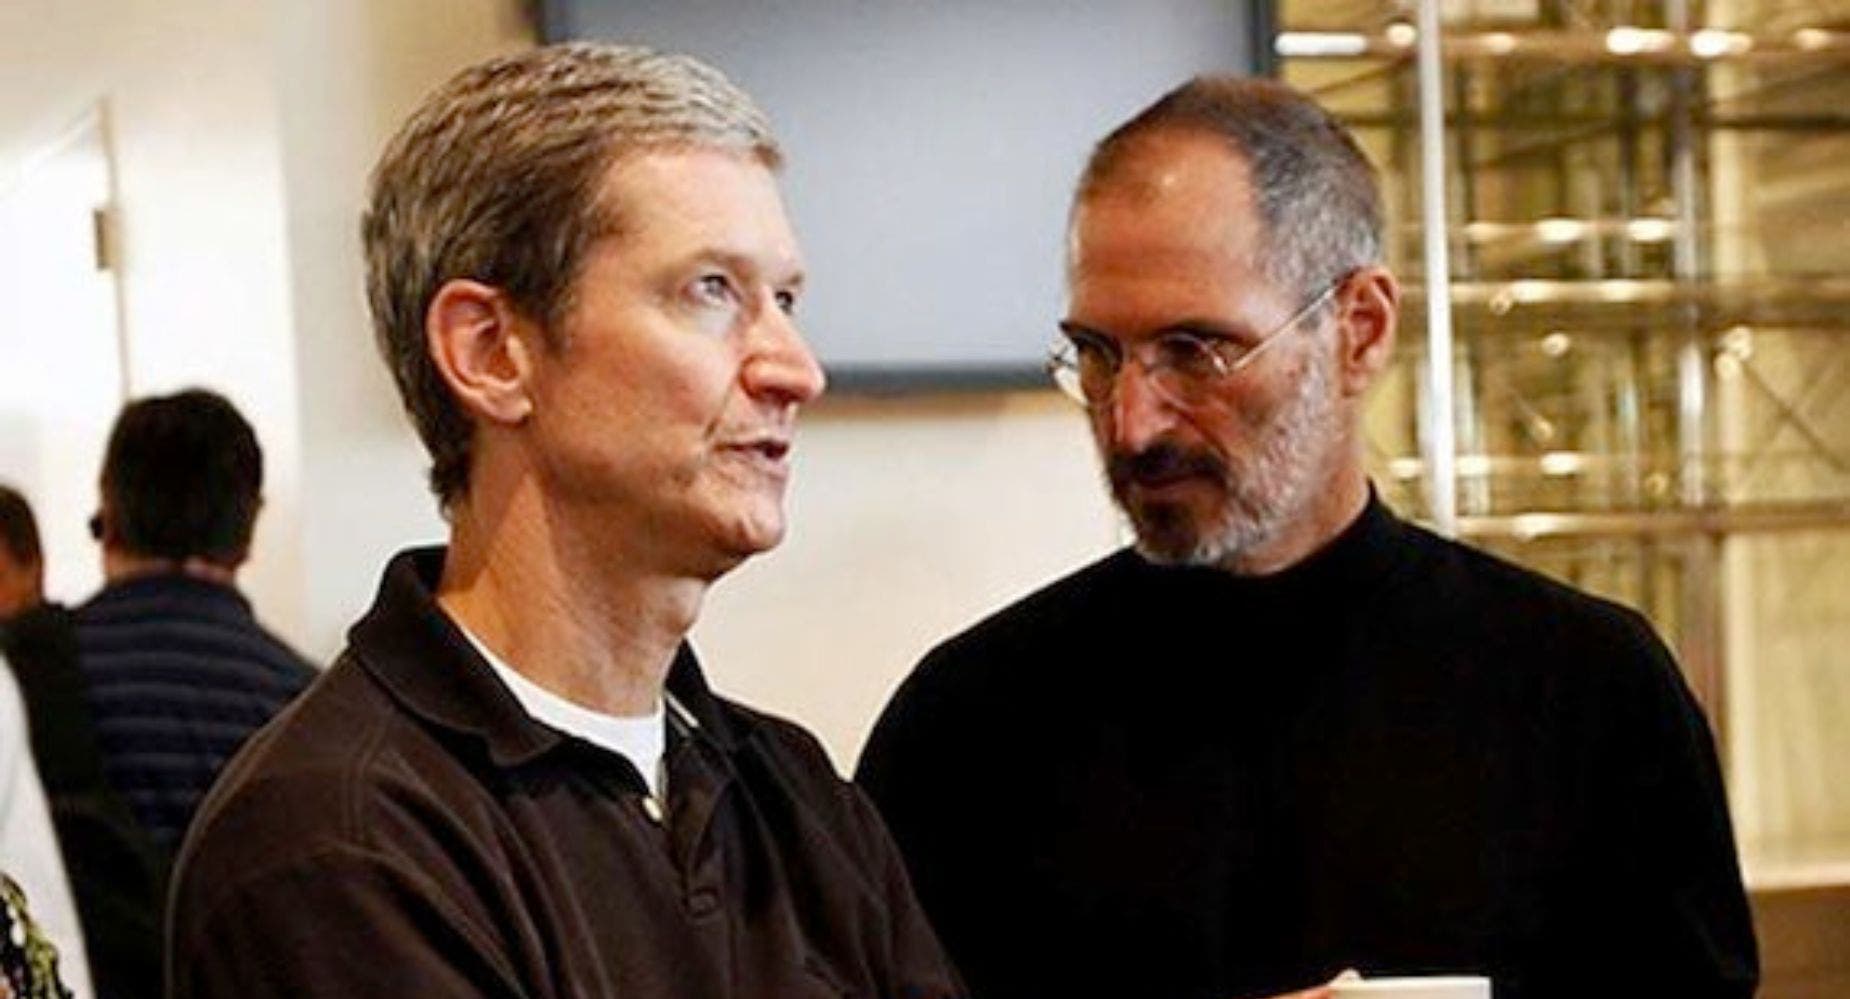 Apple's Tim Cook On His Biggest Dispute With Steve Jobs: 'His Way Was More Creative And More Different'